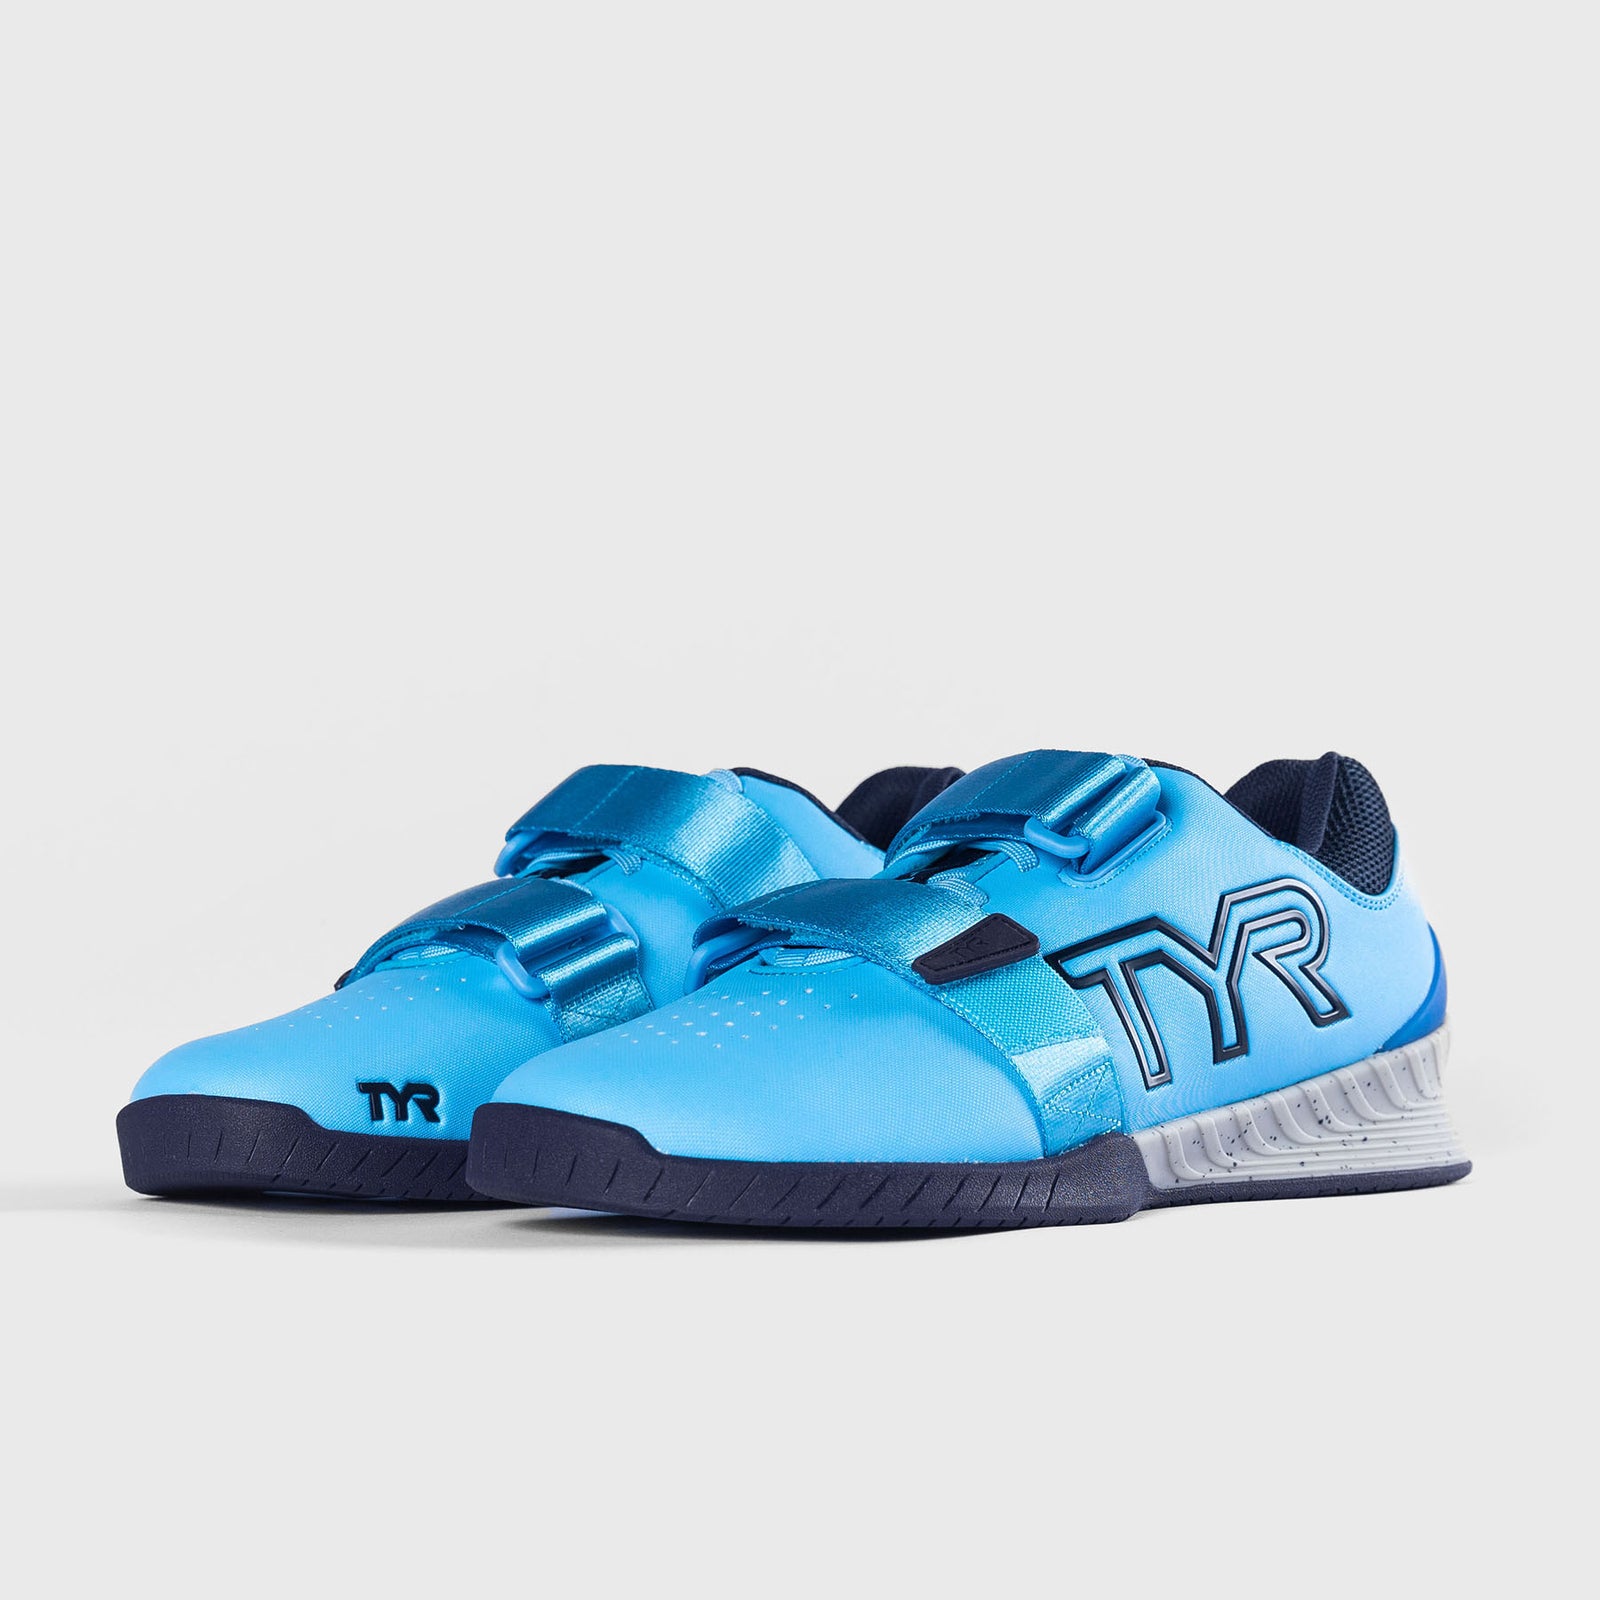 TYR Sport, Back in Stock! The First-Ever Anatomical Toe Box Lifting Shoe -  The L-1 Lifter - designed and engineered in collaboration with Squat  Univ